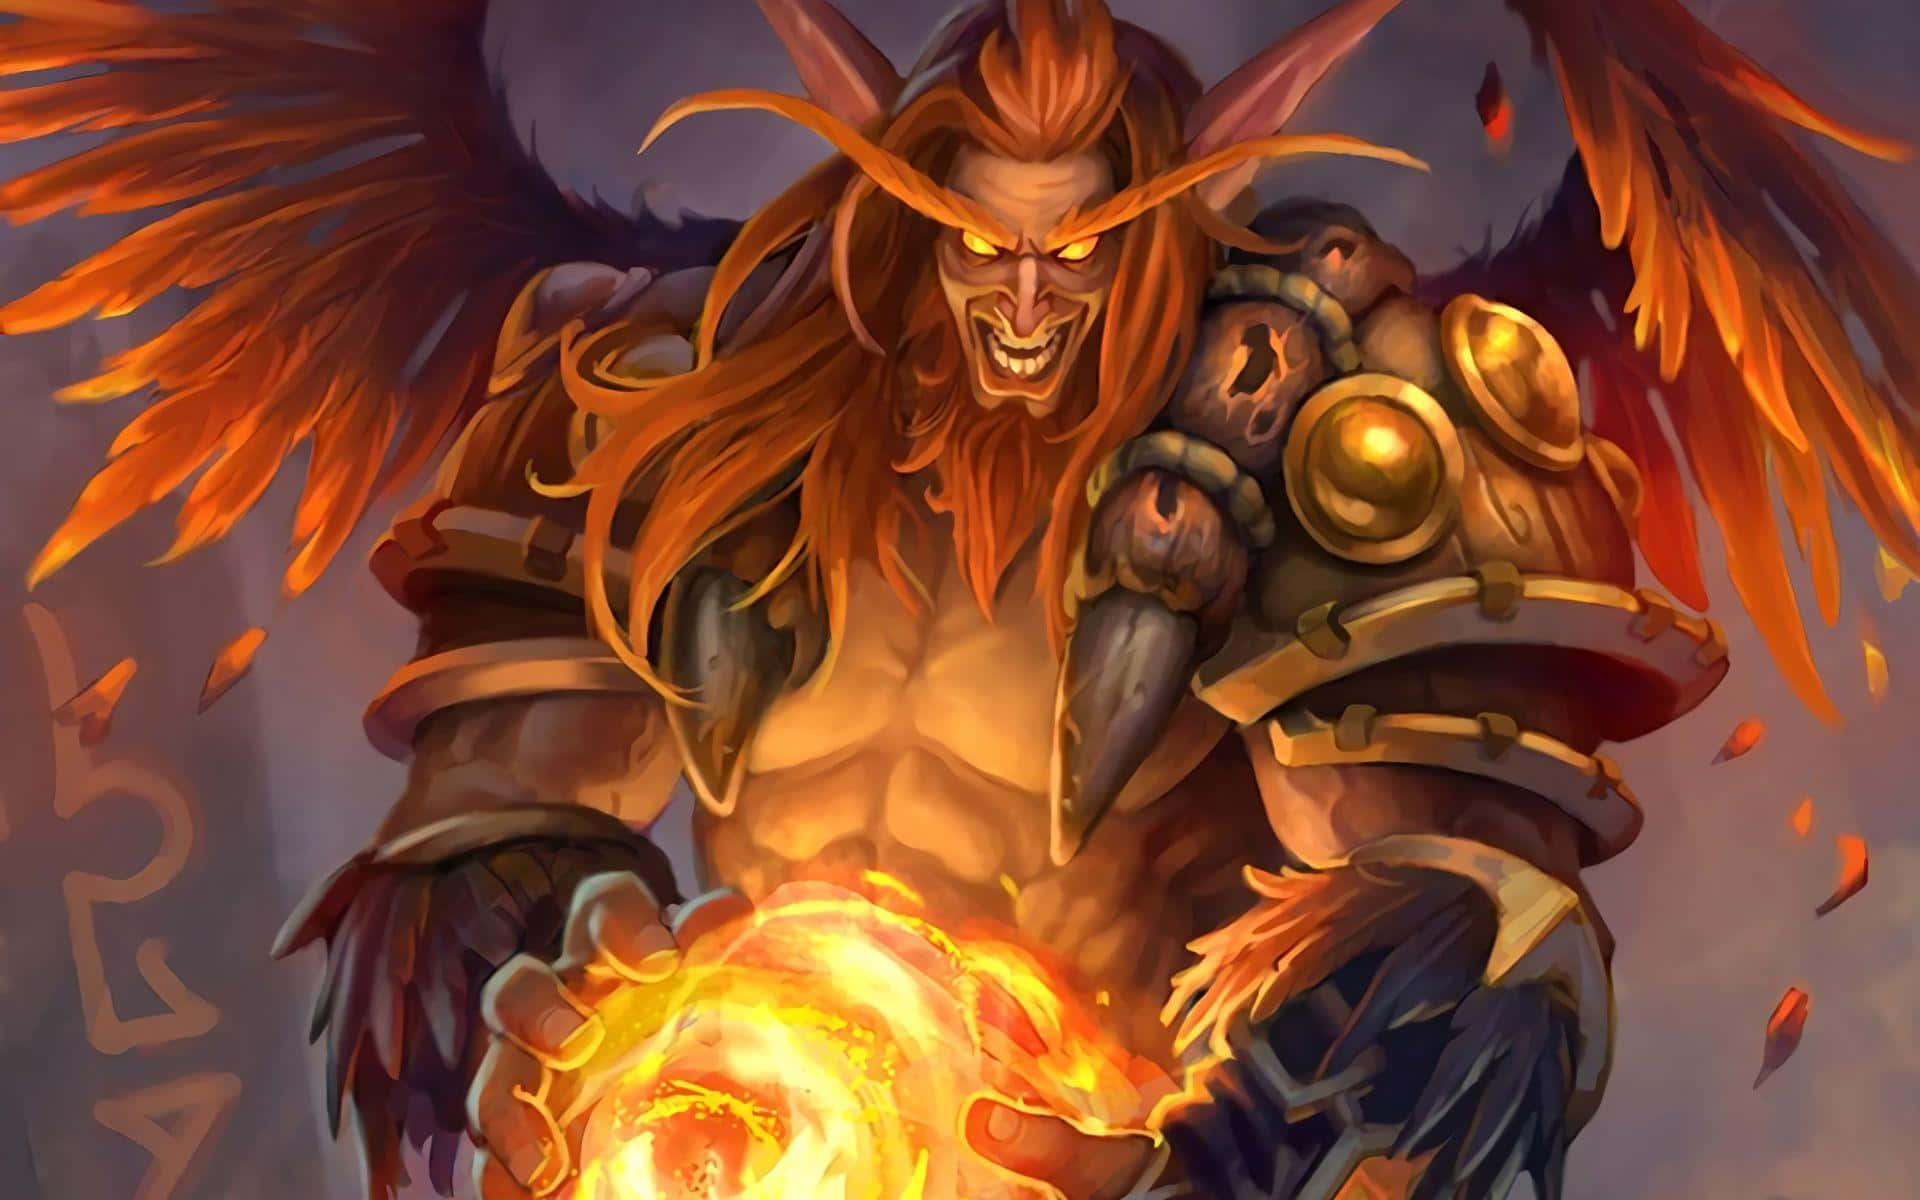 Journey through the realms of Hearthstone